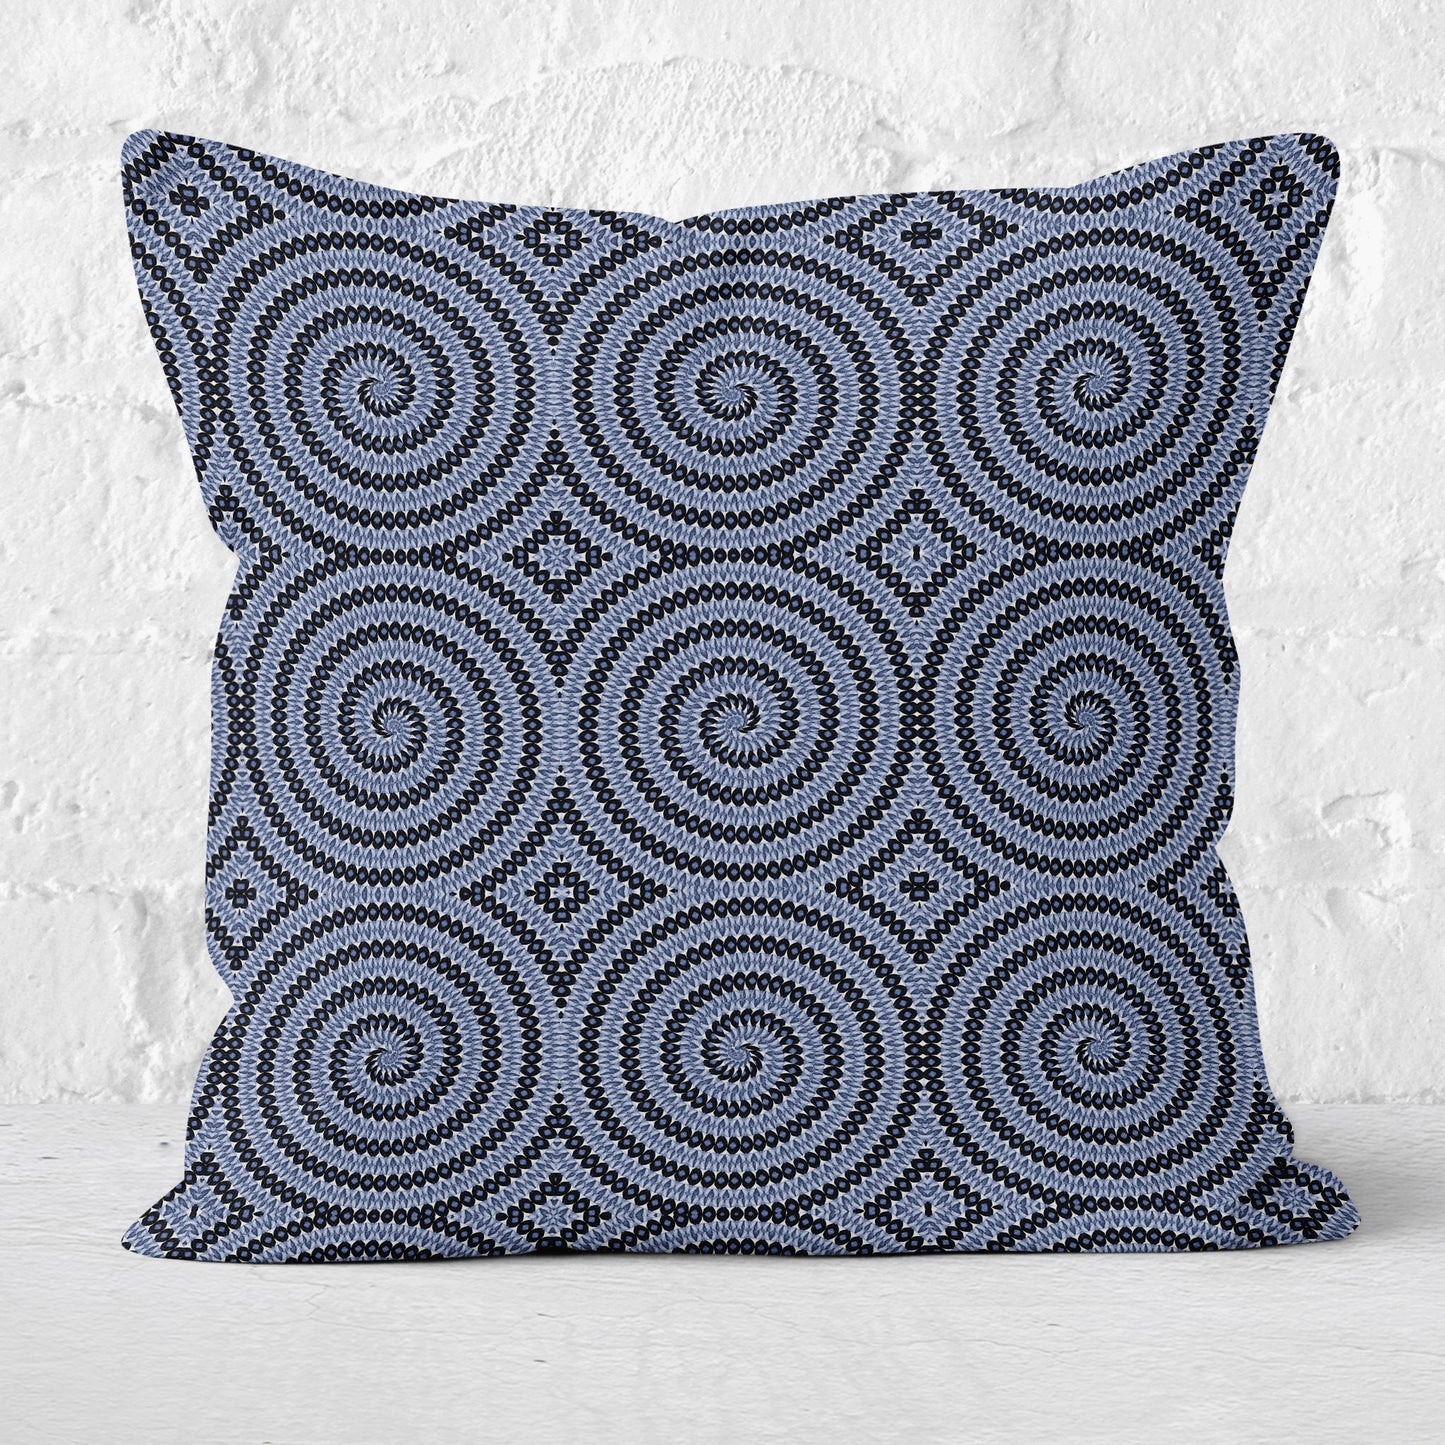 Pillow featuring geometric circular pattern in blue and white with a white brick wall in the background